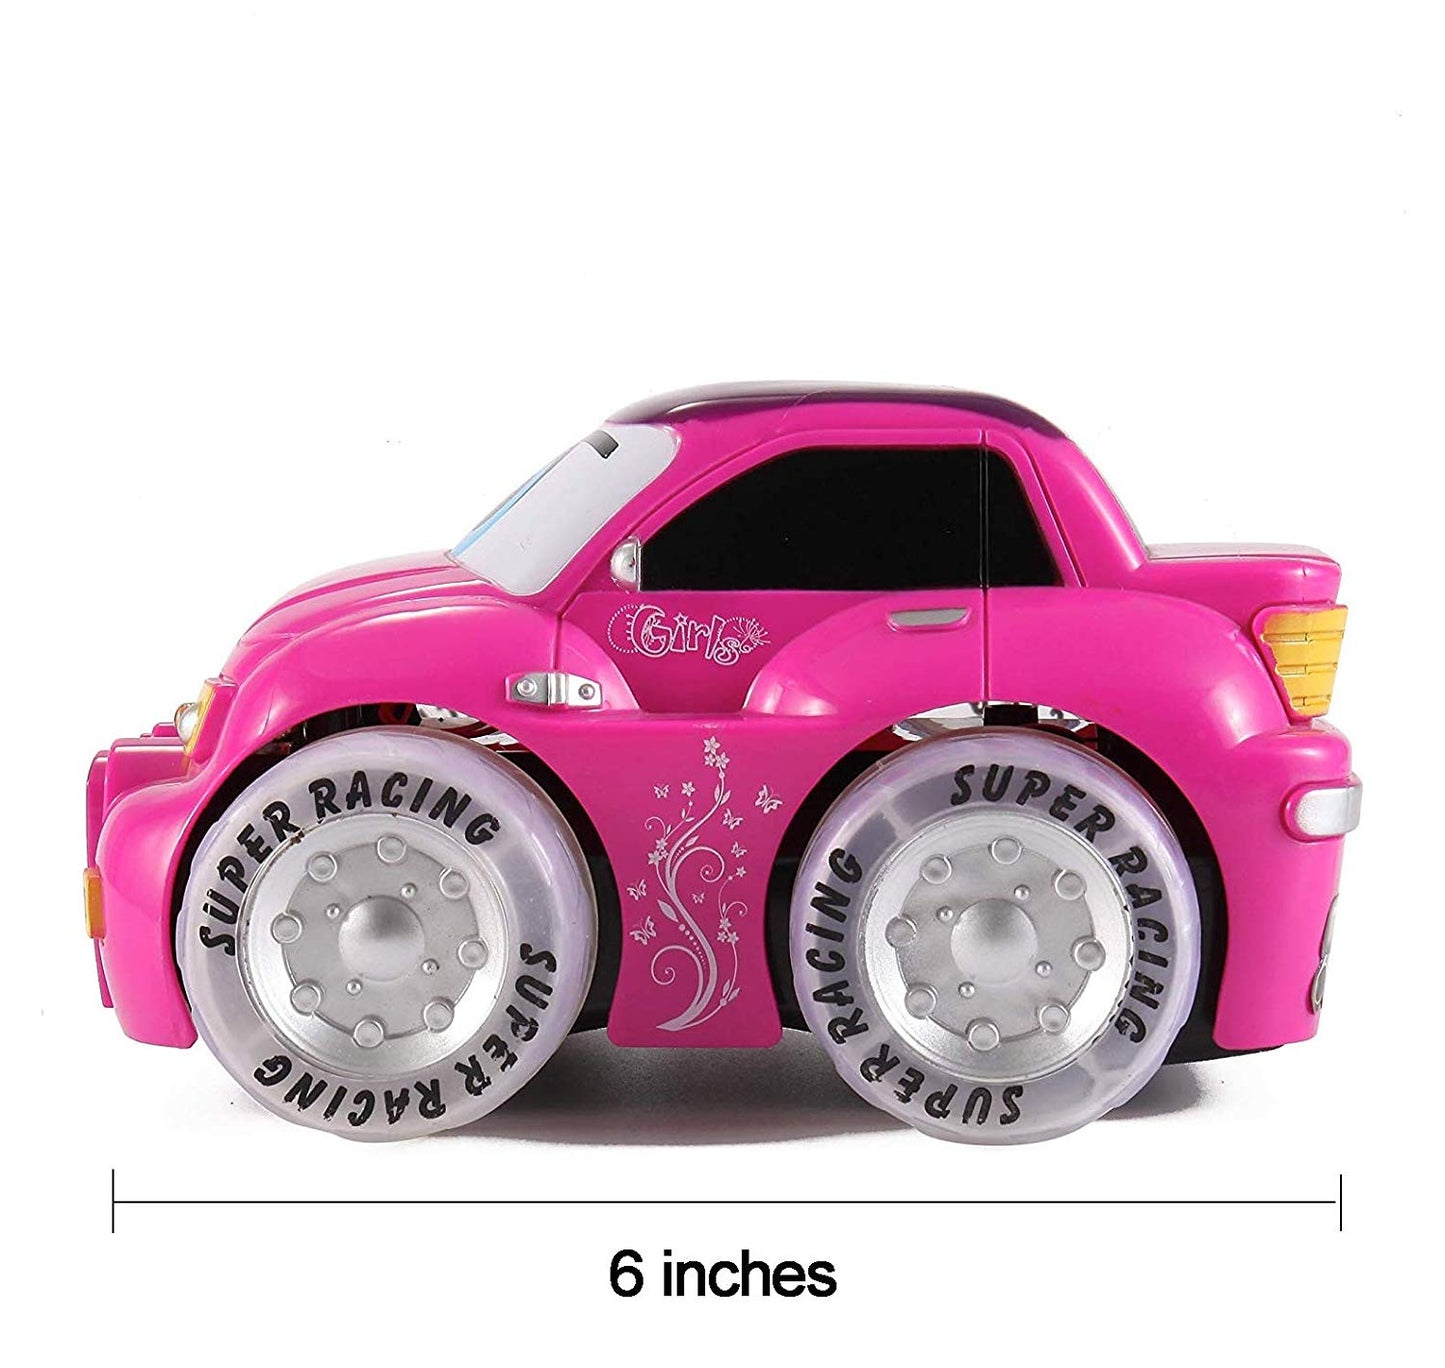 My First RC Car for Girls | Pink Purple Remote Control 2CH Racer Vehicle for Kids, Toddlers